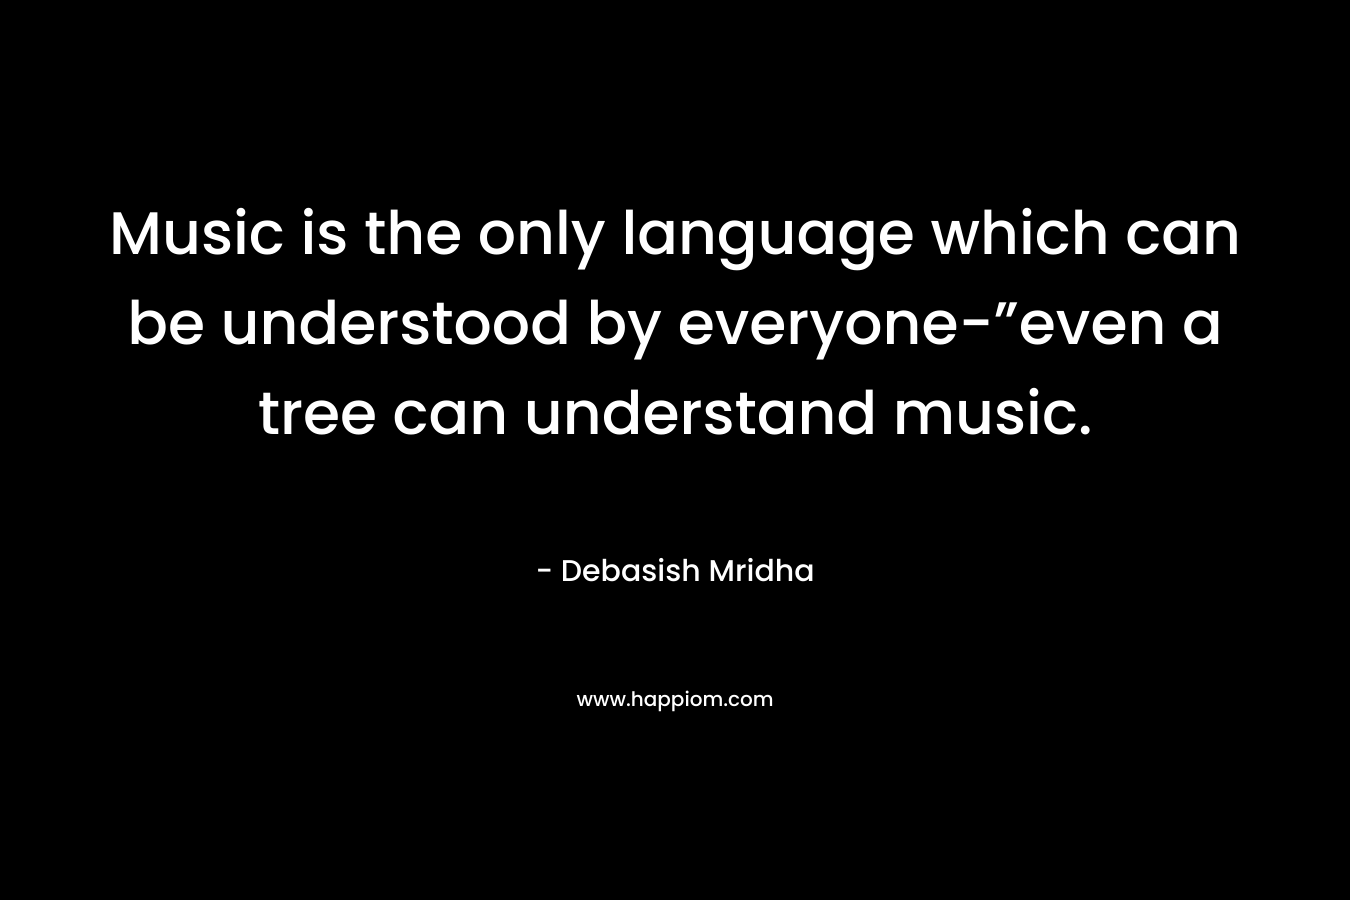 Music is the only language which can be understood by everyone-”even a tree can understand music.